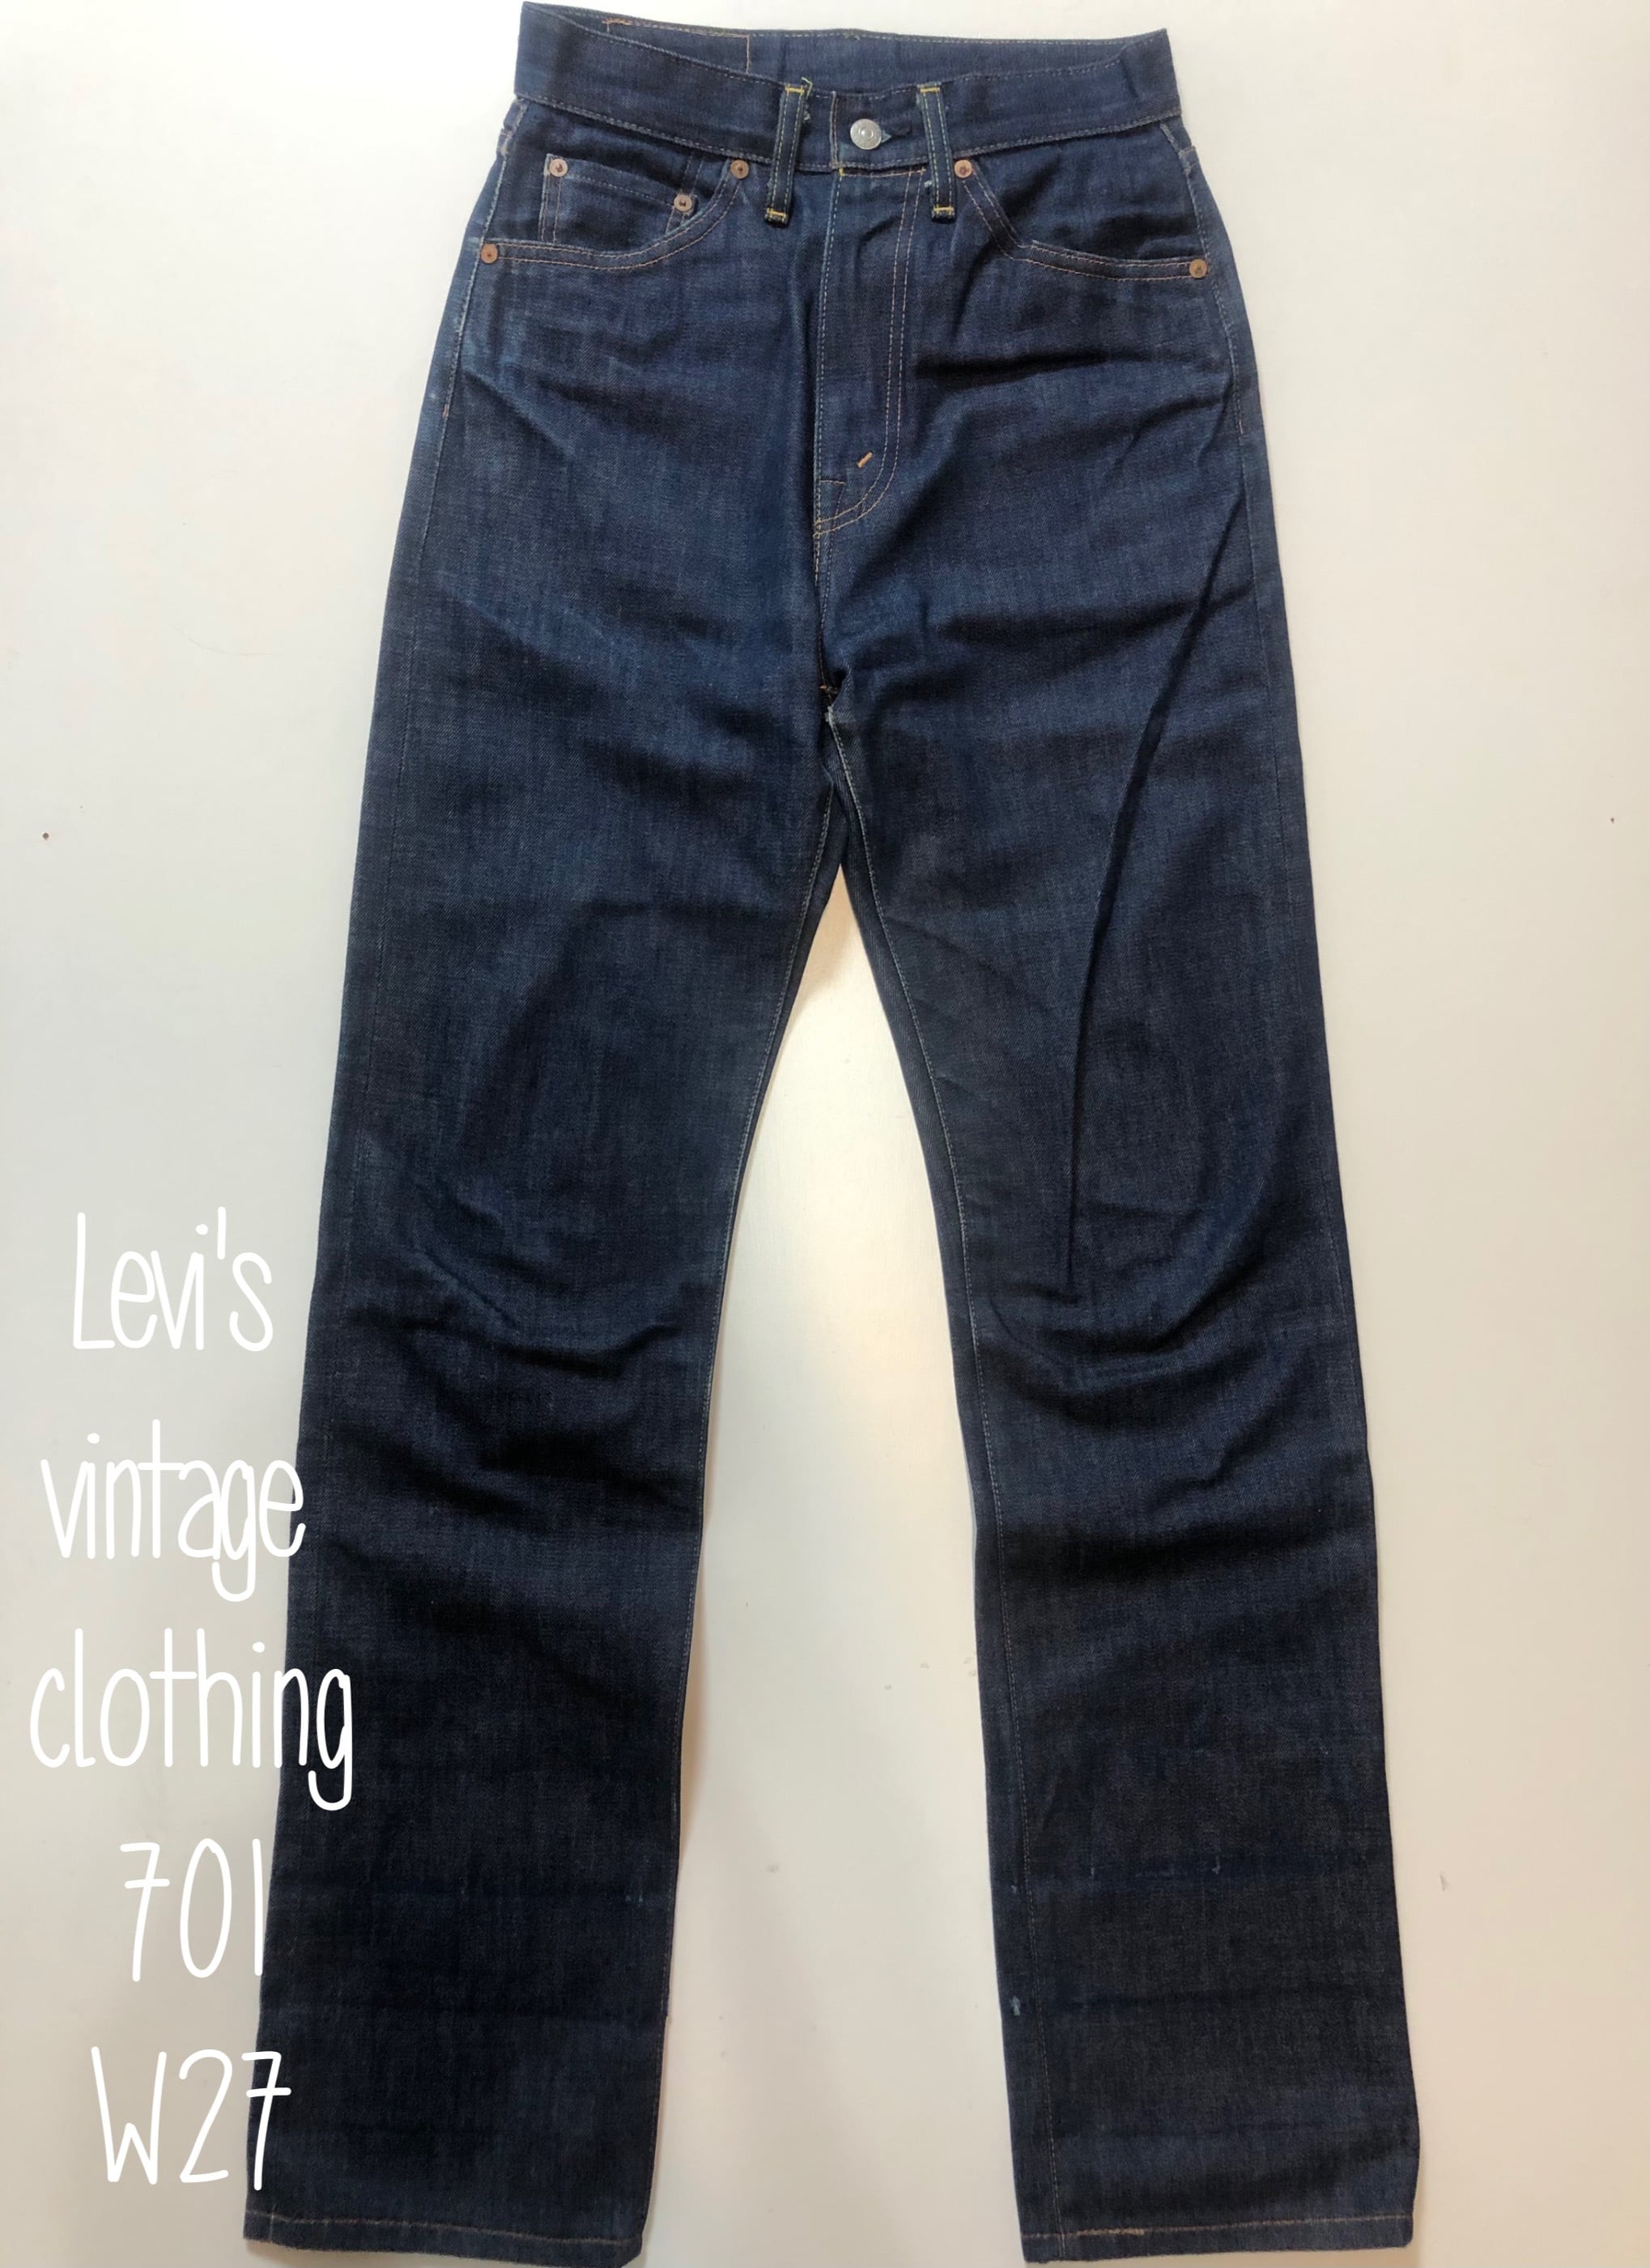 W27 LEVI'S VINTAGE CLOTHING 701 リーバイス ヴィンテージクロージング 426 | ＳＥＣＯＮＤ HAND RED  powered by BASE